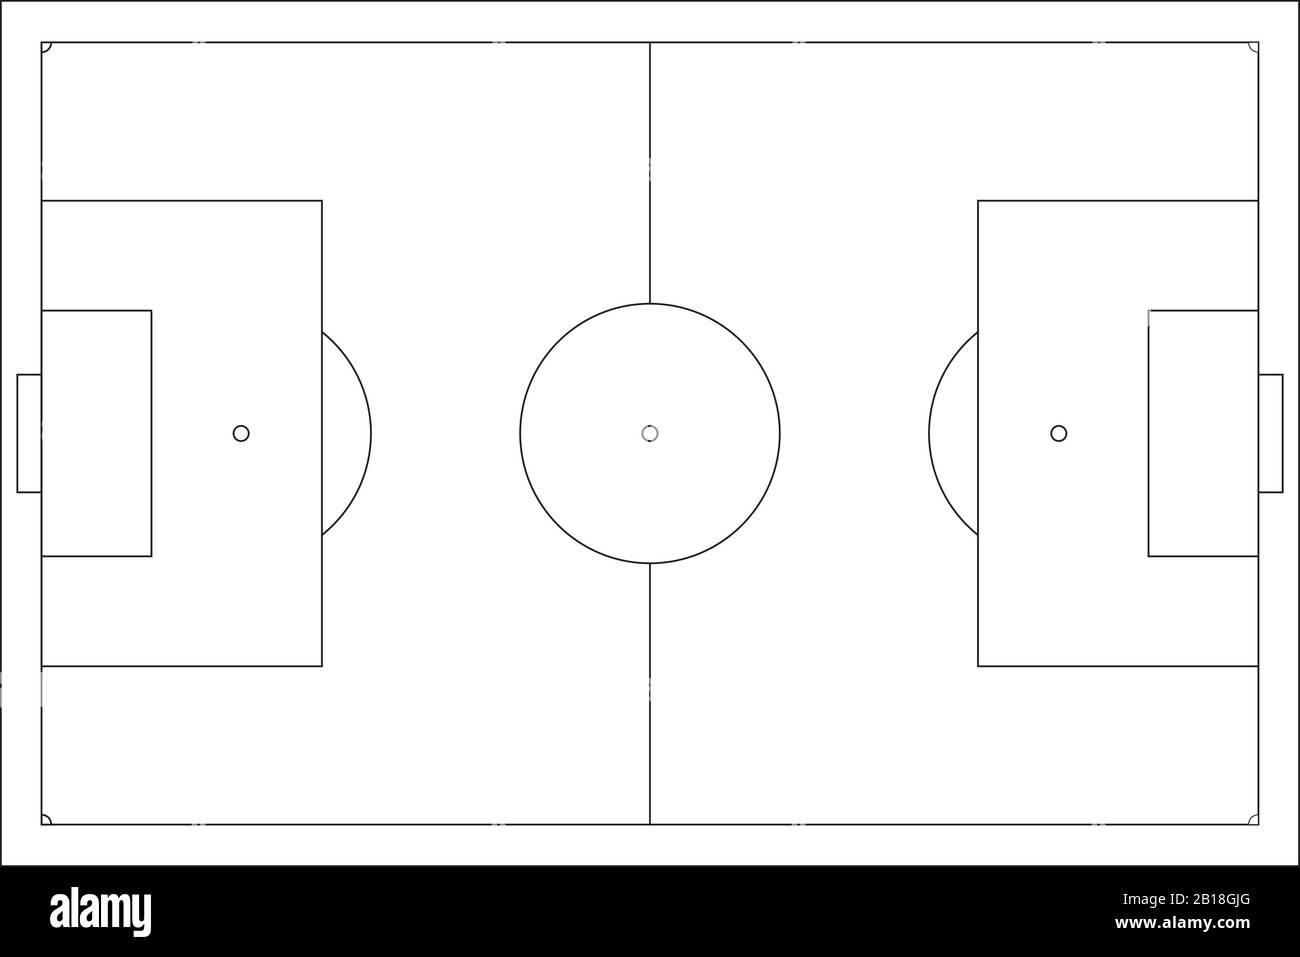 Football pitch. Outline Stock Vector